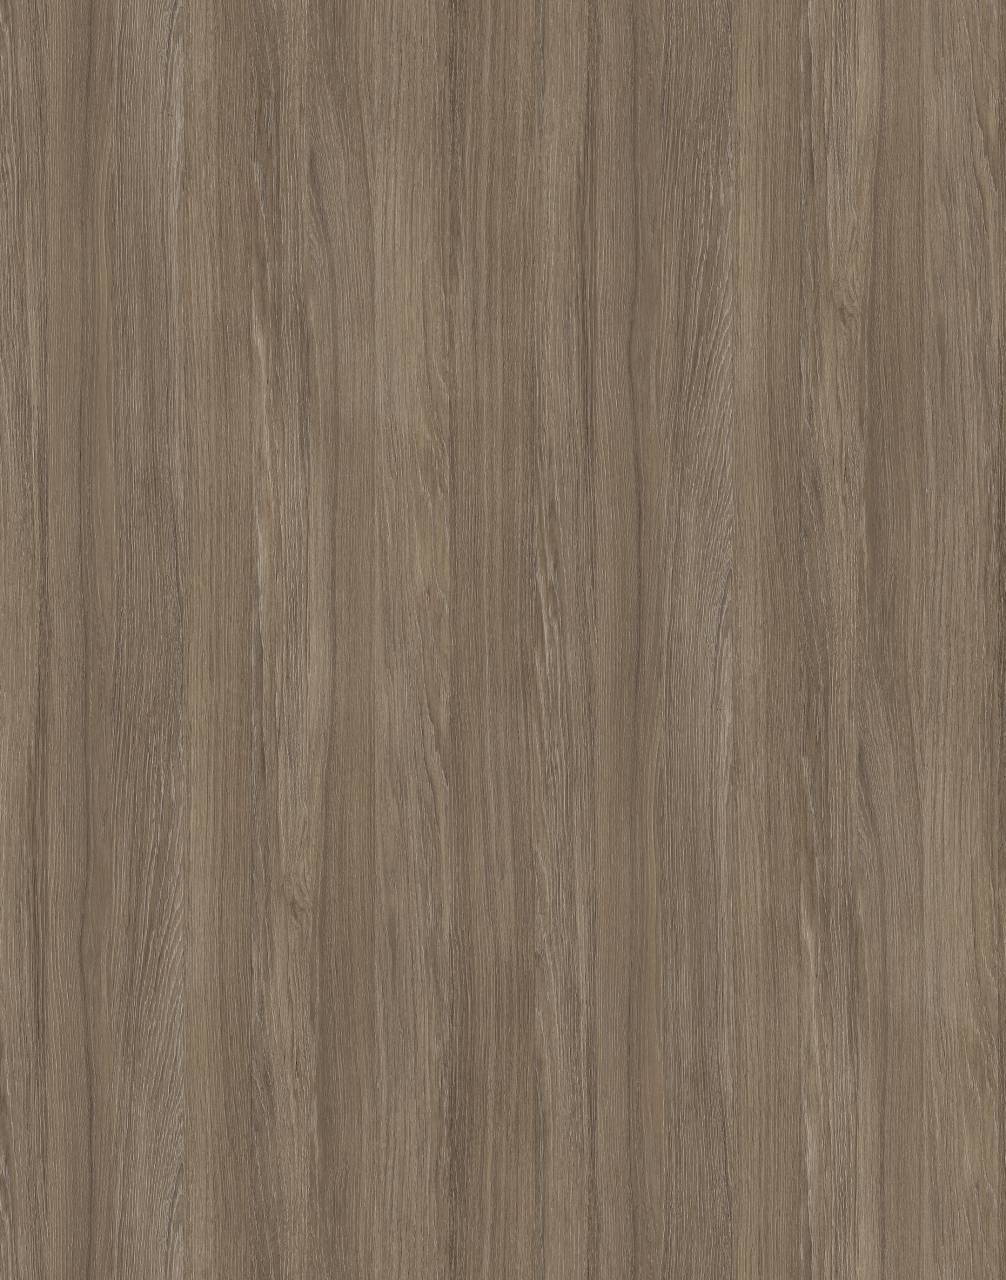 Coffee Urban Oak PW HPL with smooth surface and rich brown tones for a modern and sophisticated look.